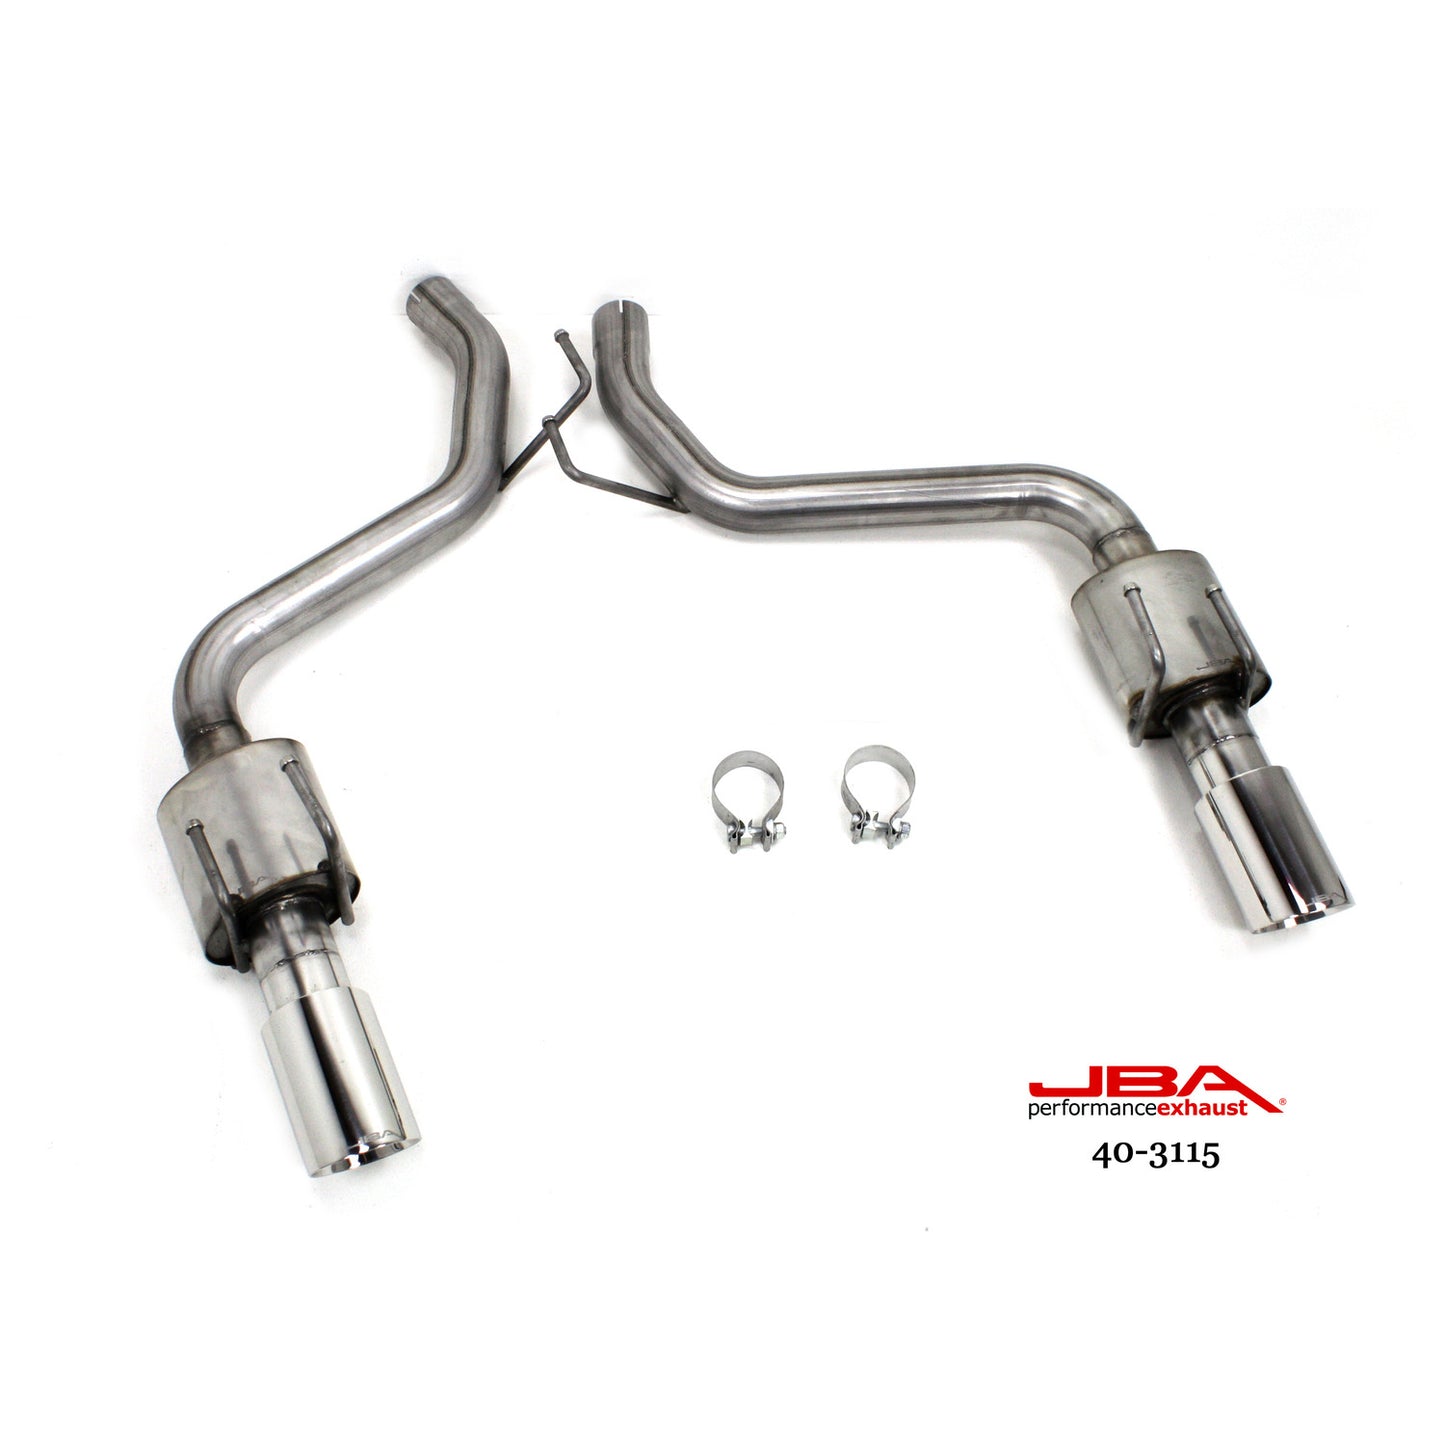 JBA Performance Exhaust 40-3115 2 1/2" Stainless Steel Exhaust System with 4" Double Wall tips 2015 Camaro Axle Back Exhaust